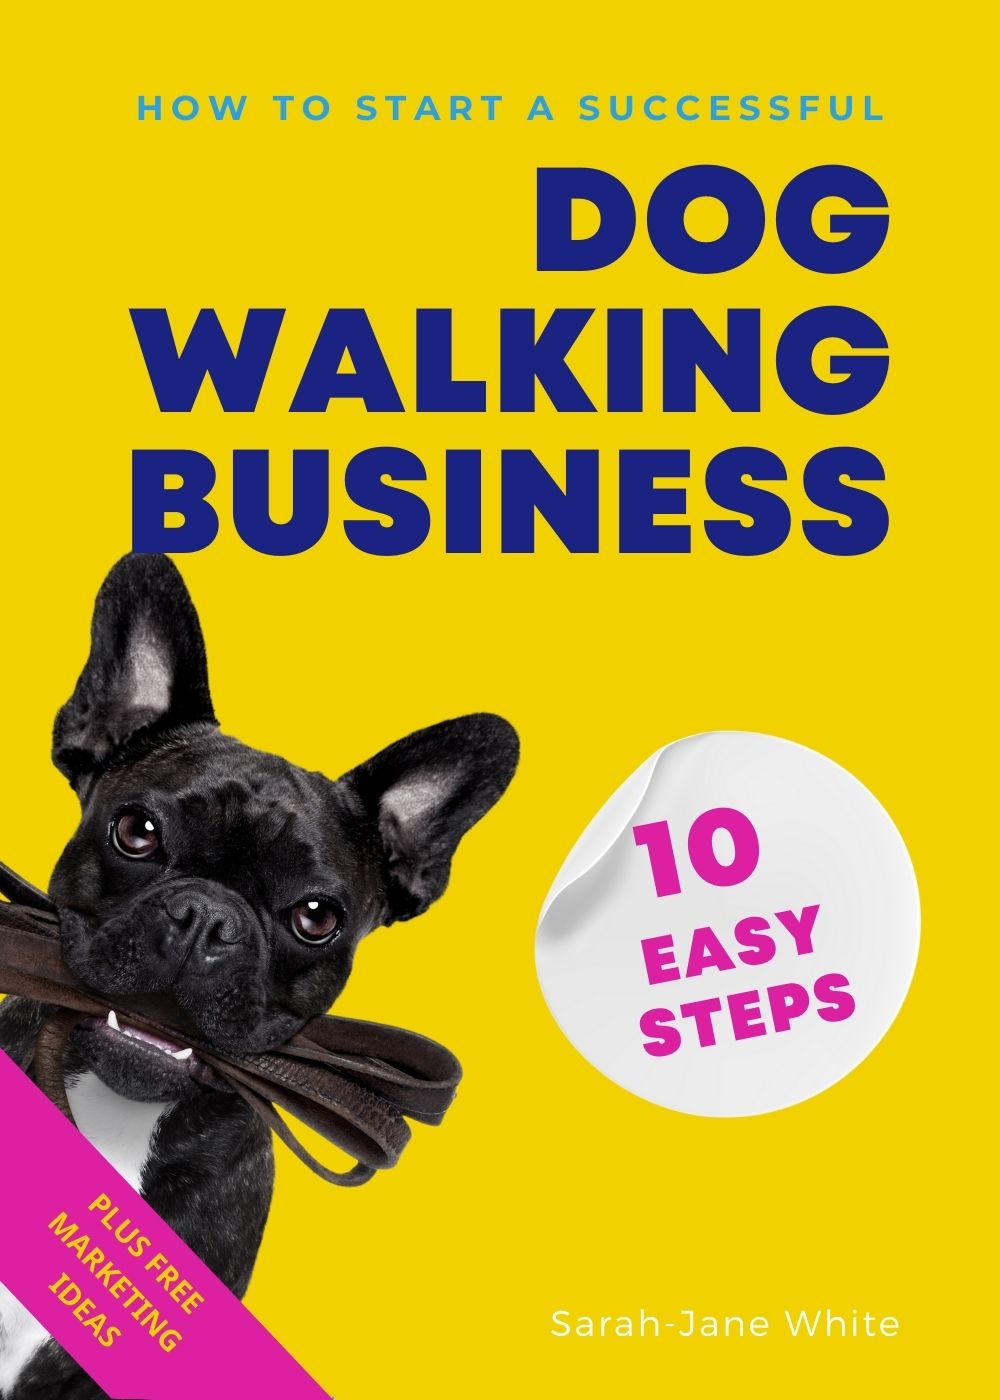 eBook: How to Start a Successful Dog Walking Business in 10 Easy Steps